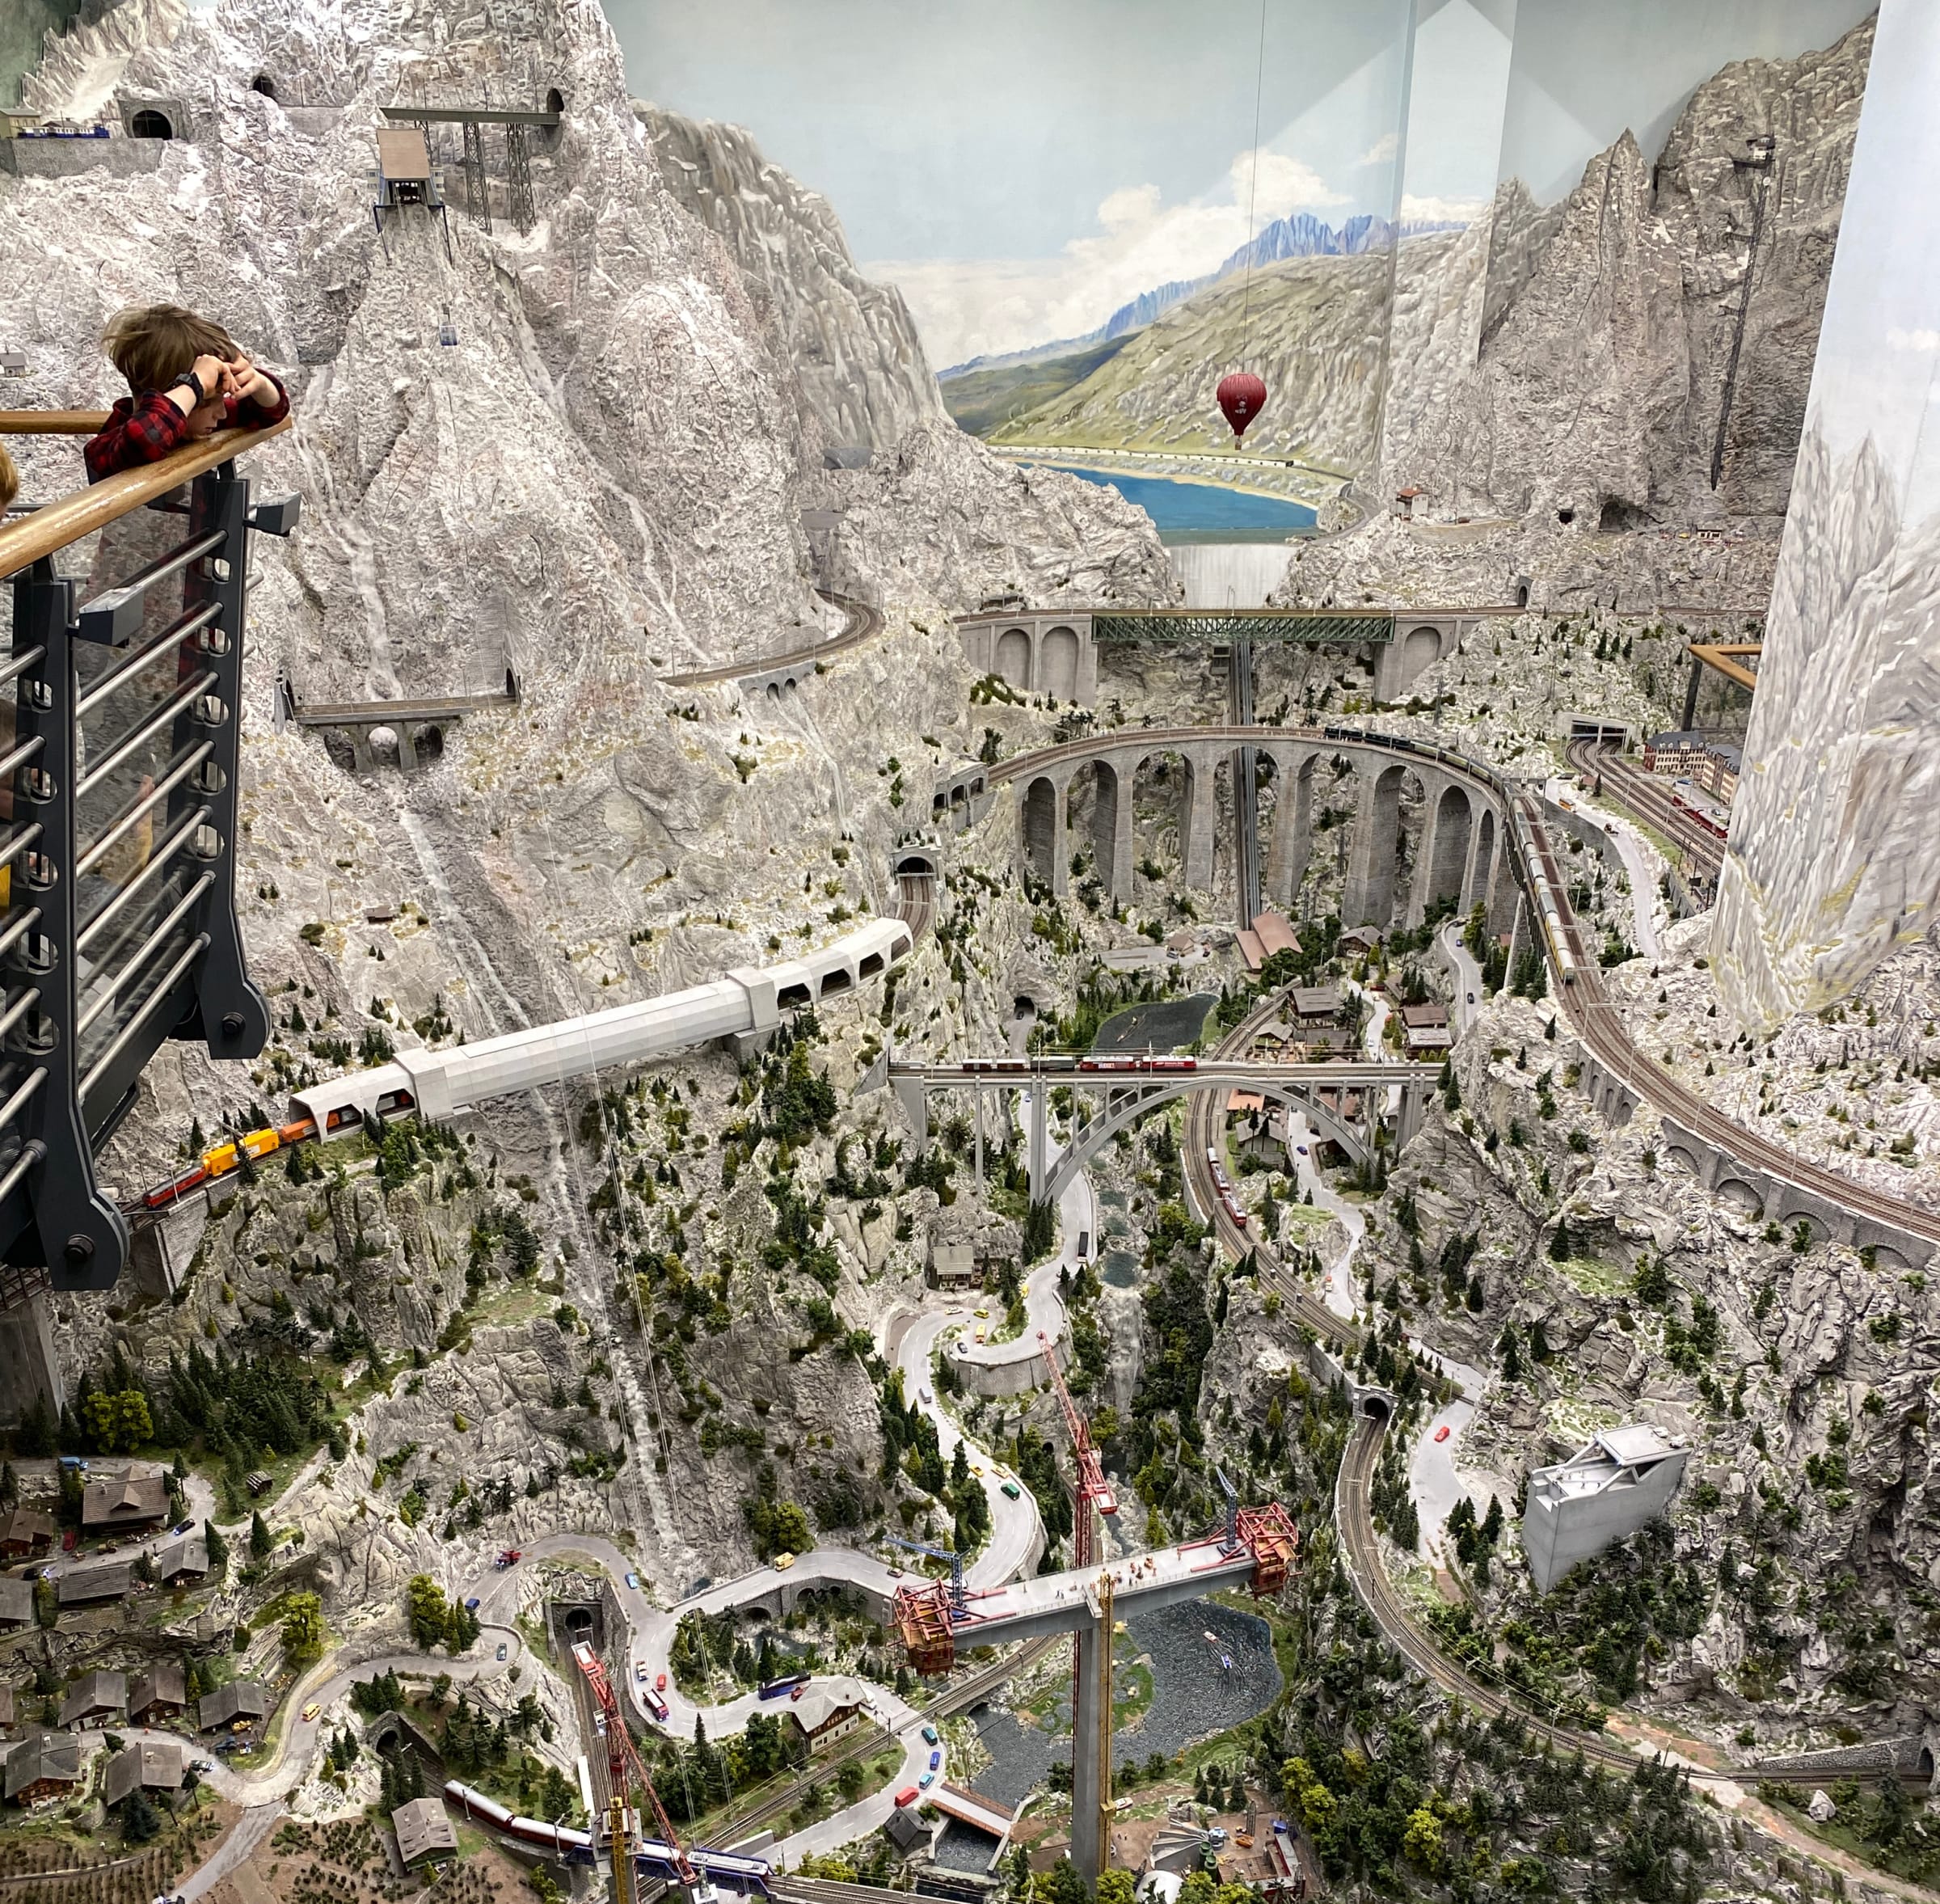 The Swiss Alps recreated at Miniatur Wunderland.